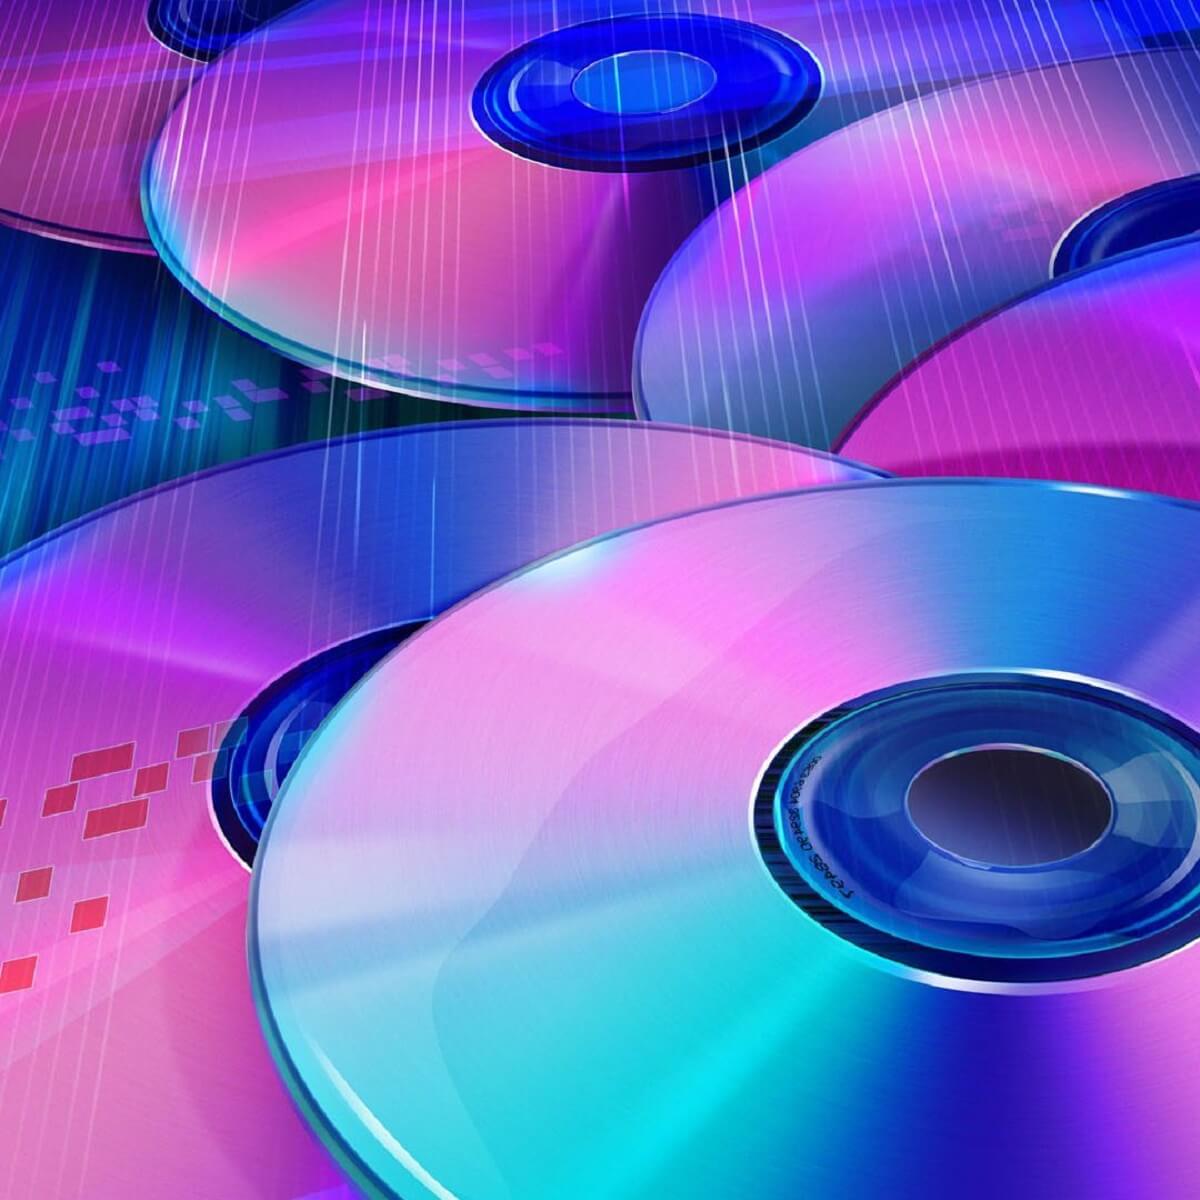 DVD playerss that play all formats